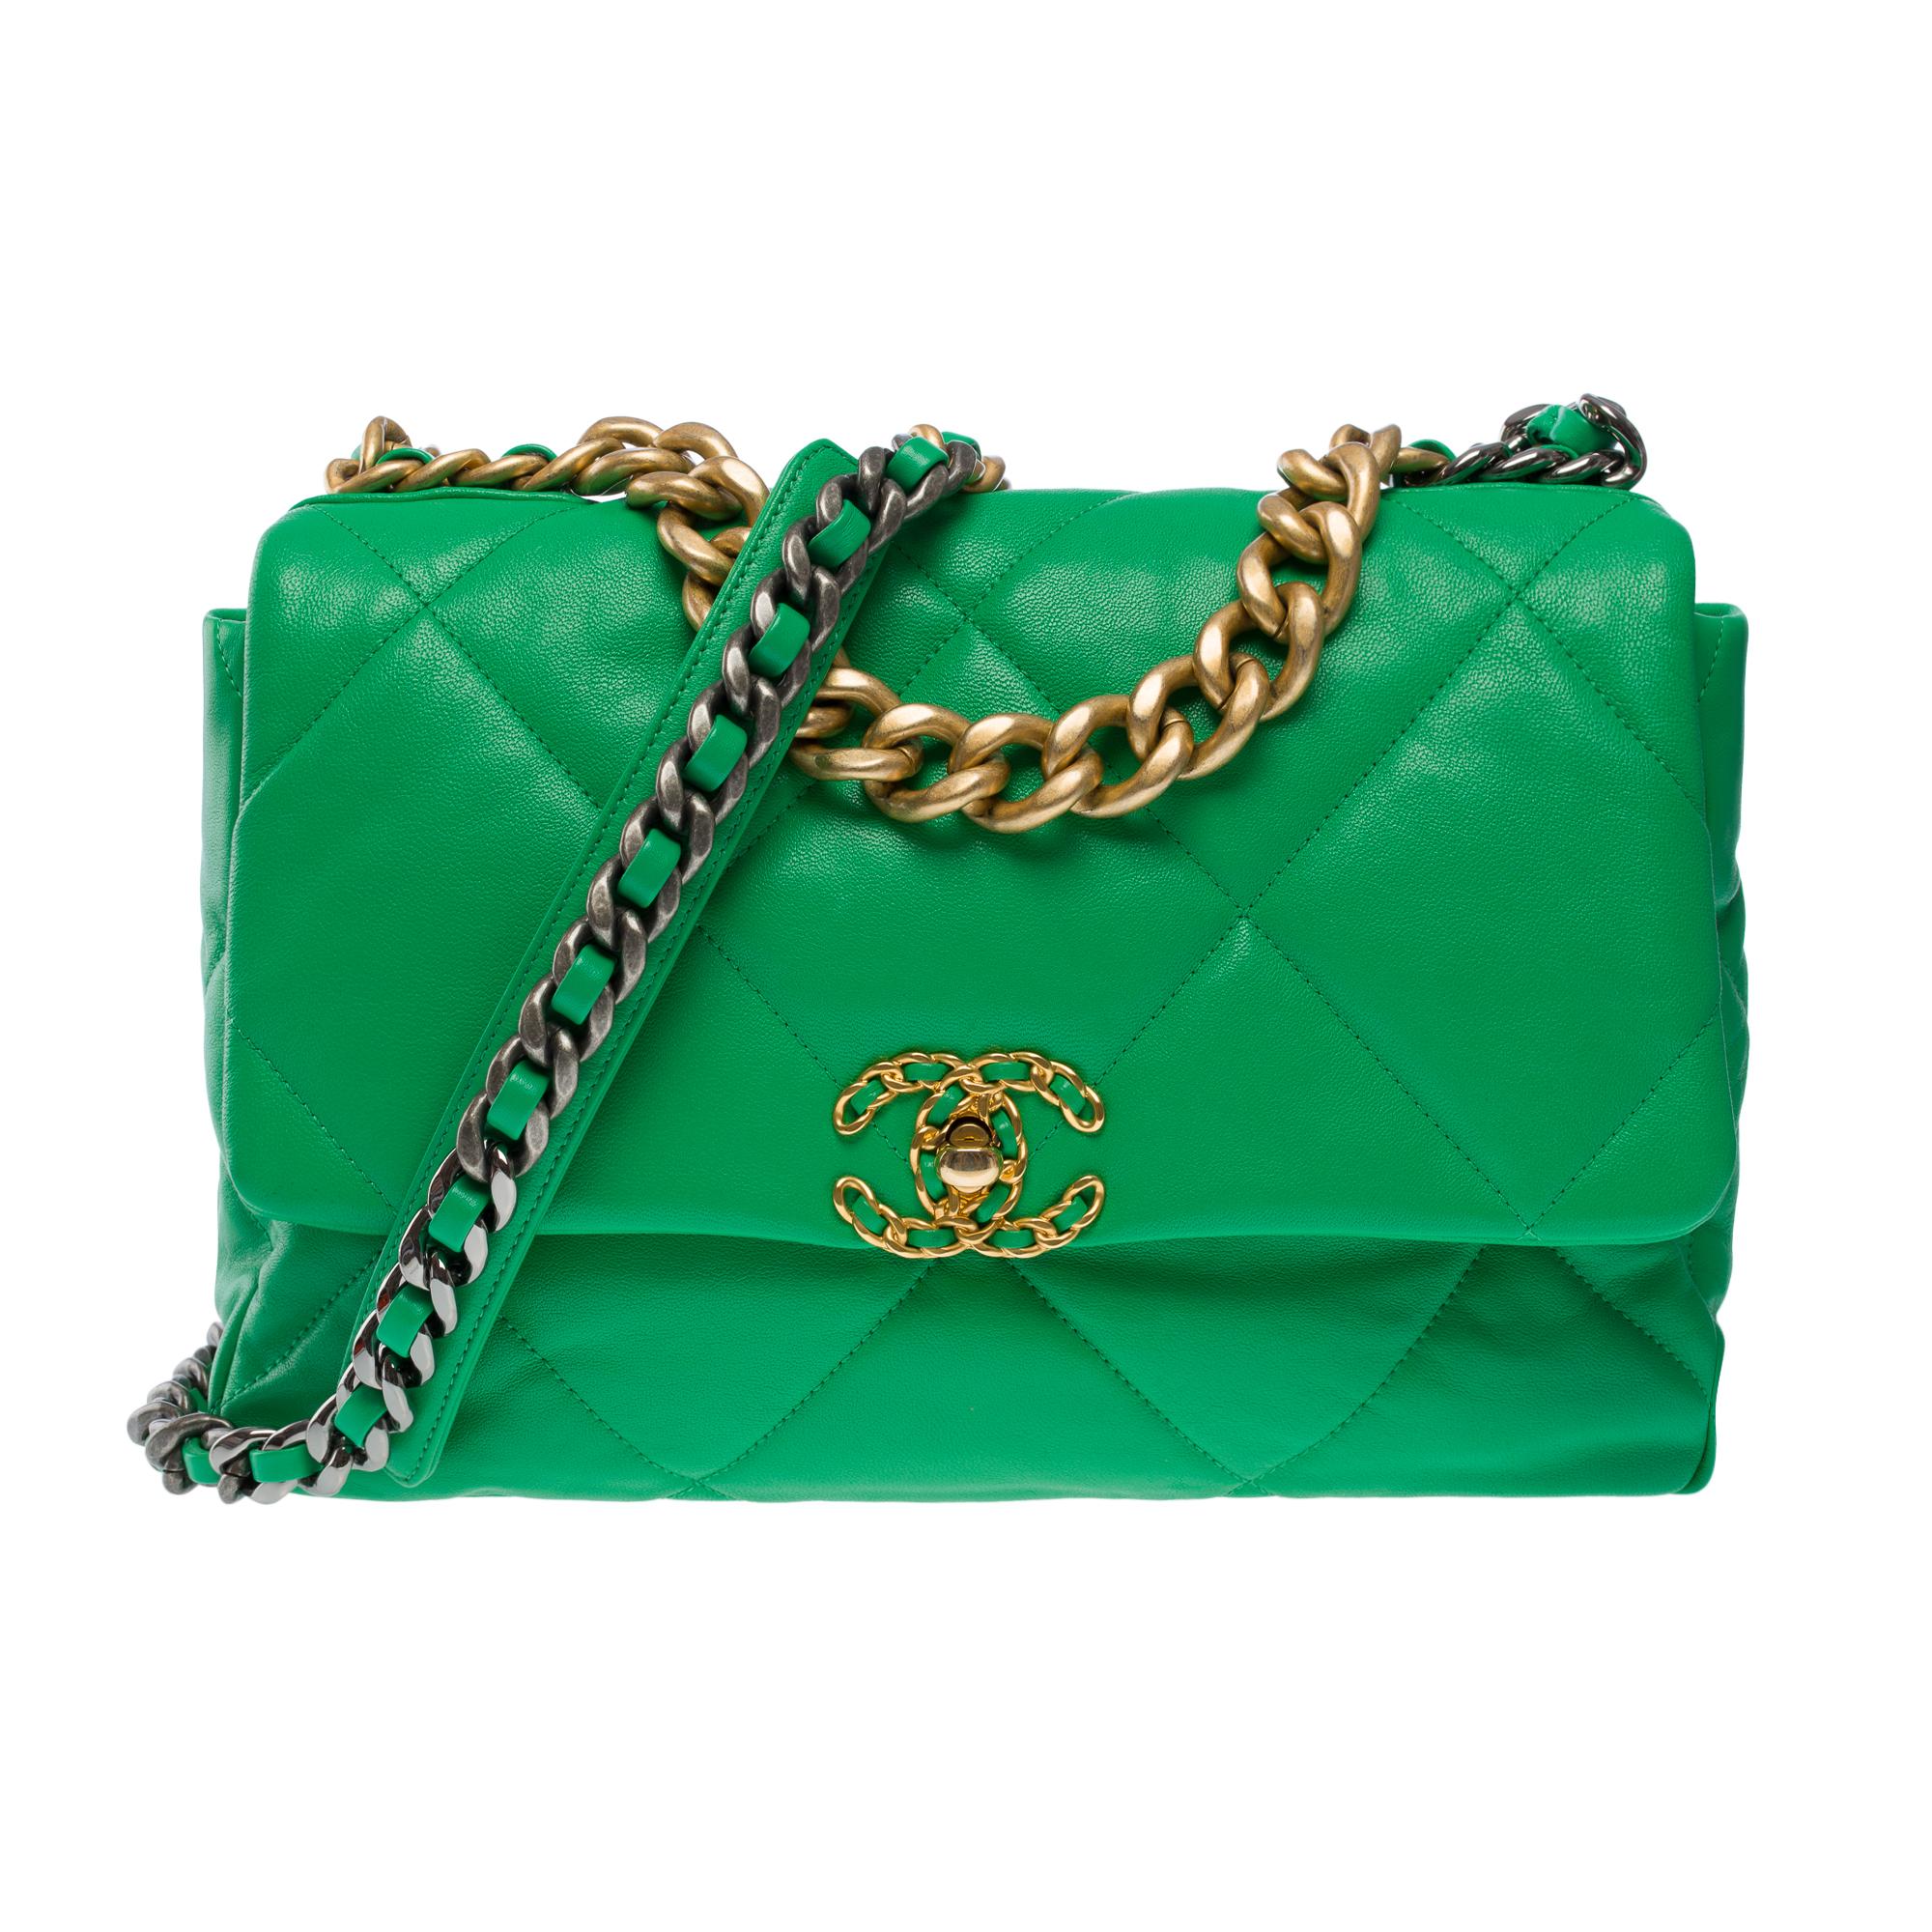 The Bright and Fancy Chanel 19 shoulder bag in green quilted leather, gold and silver metal hardware, gold metal handle, a gold and silver metal chain handle intertwined with green leather for a carry hand, shoulder or crossbody carry

Flap